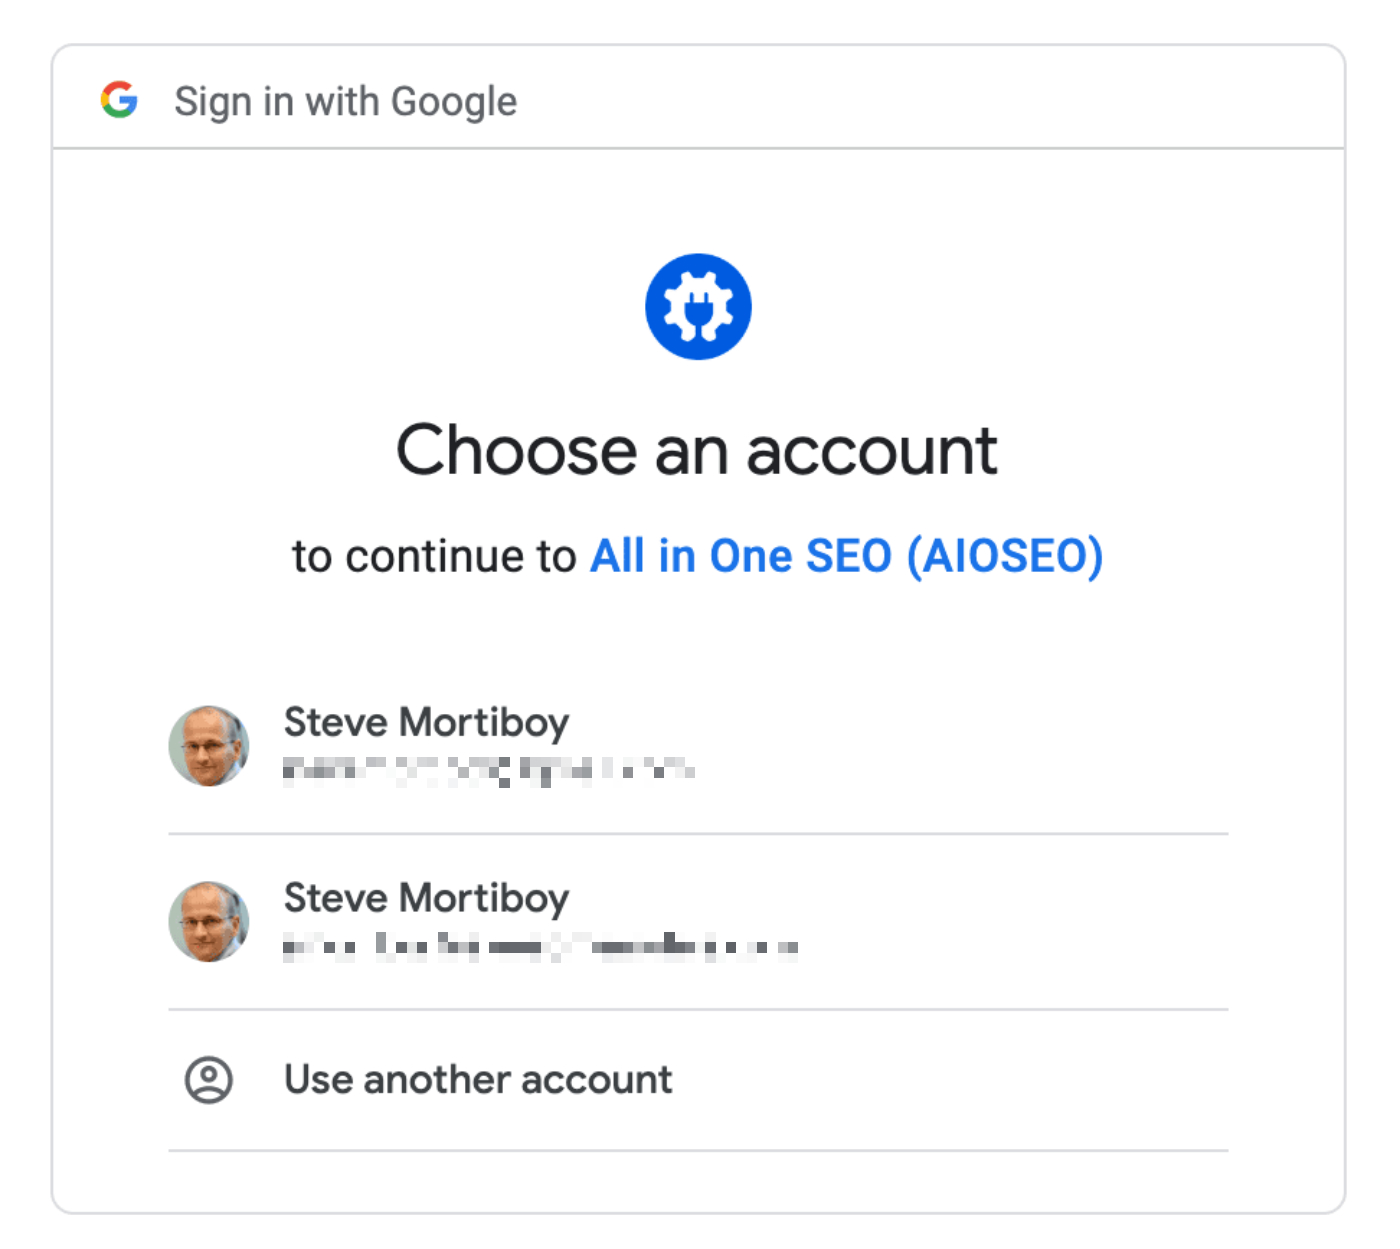 Choose an account screen from Google